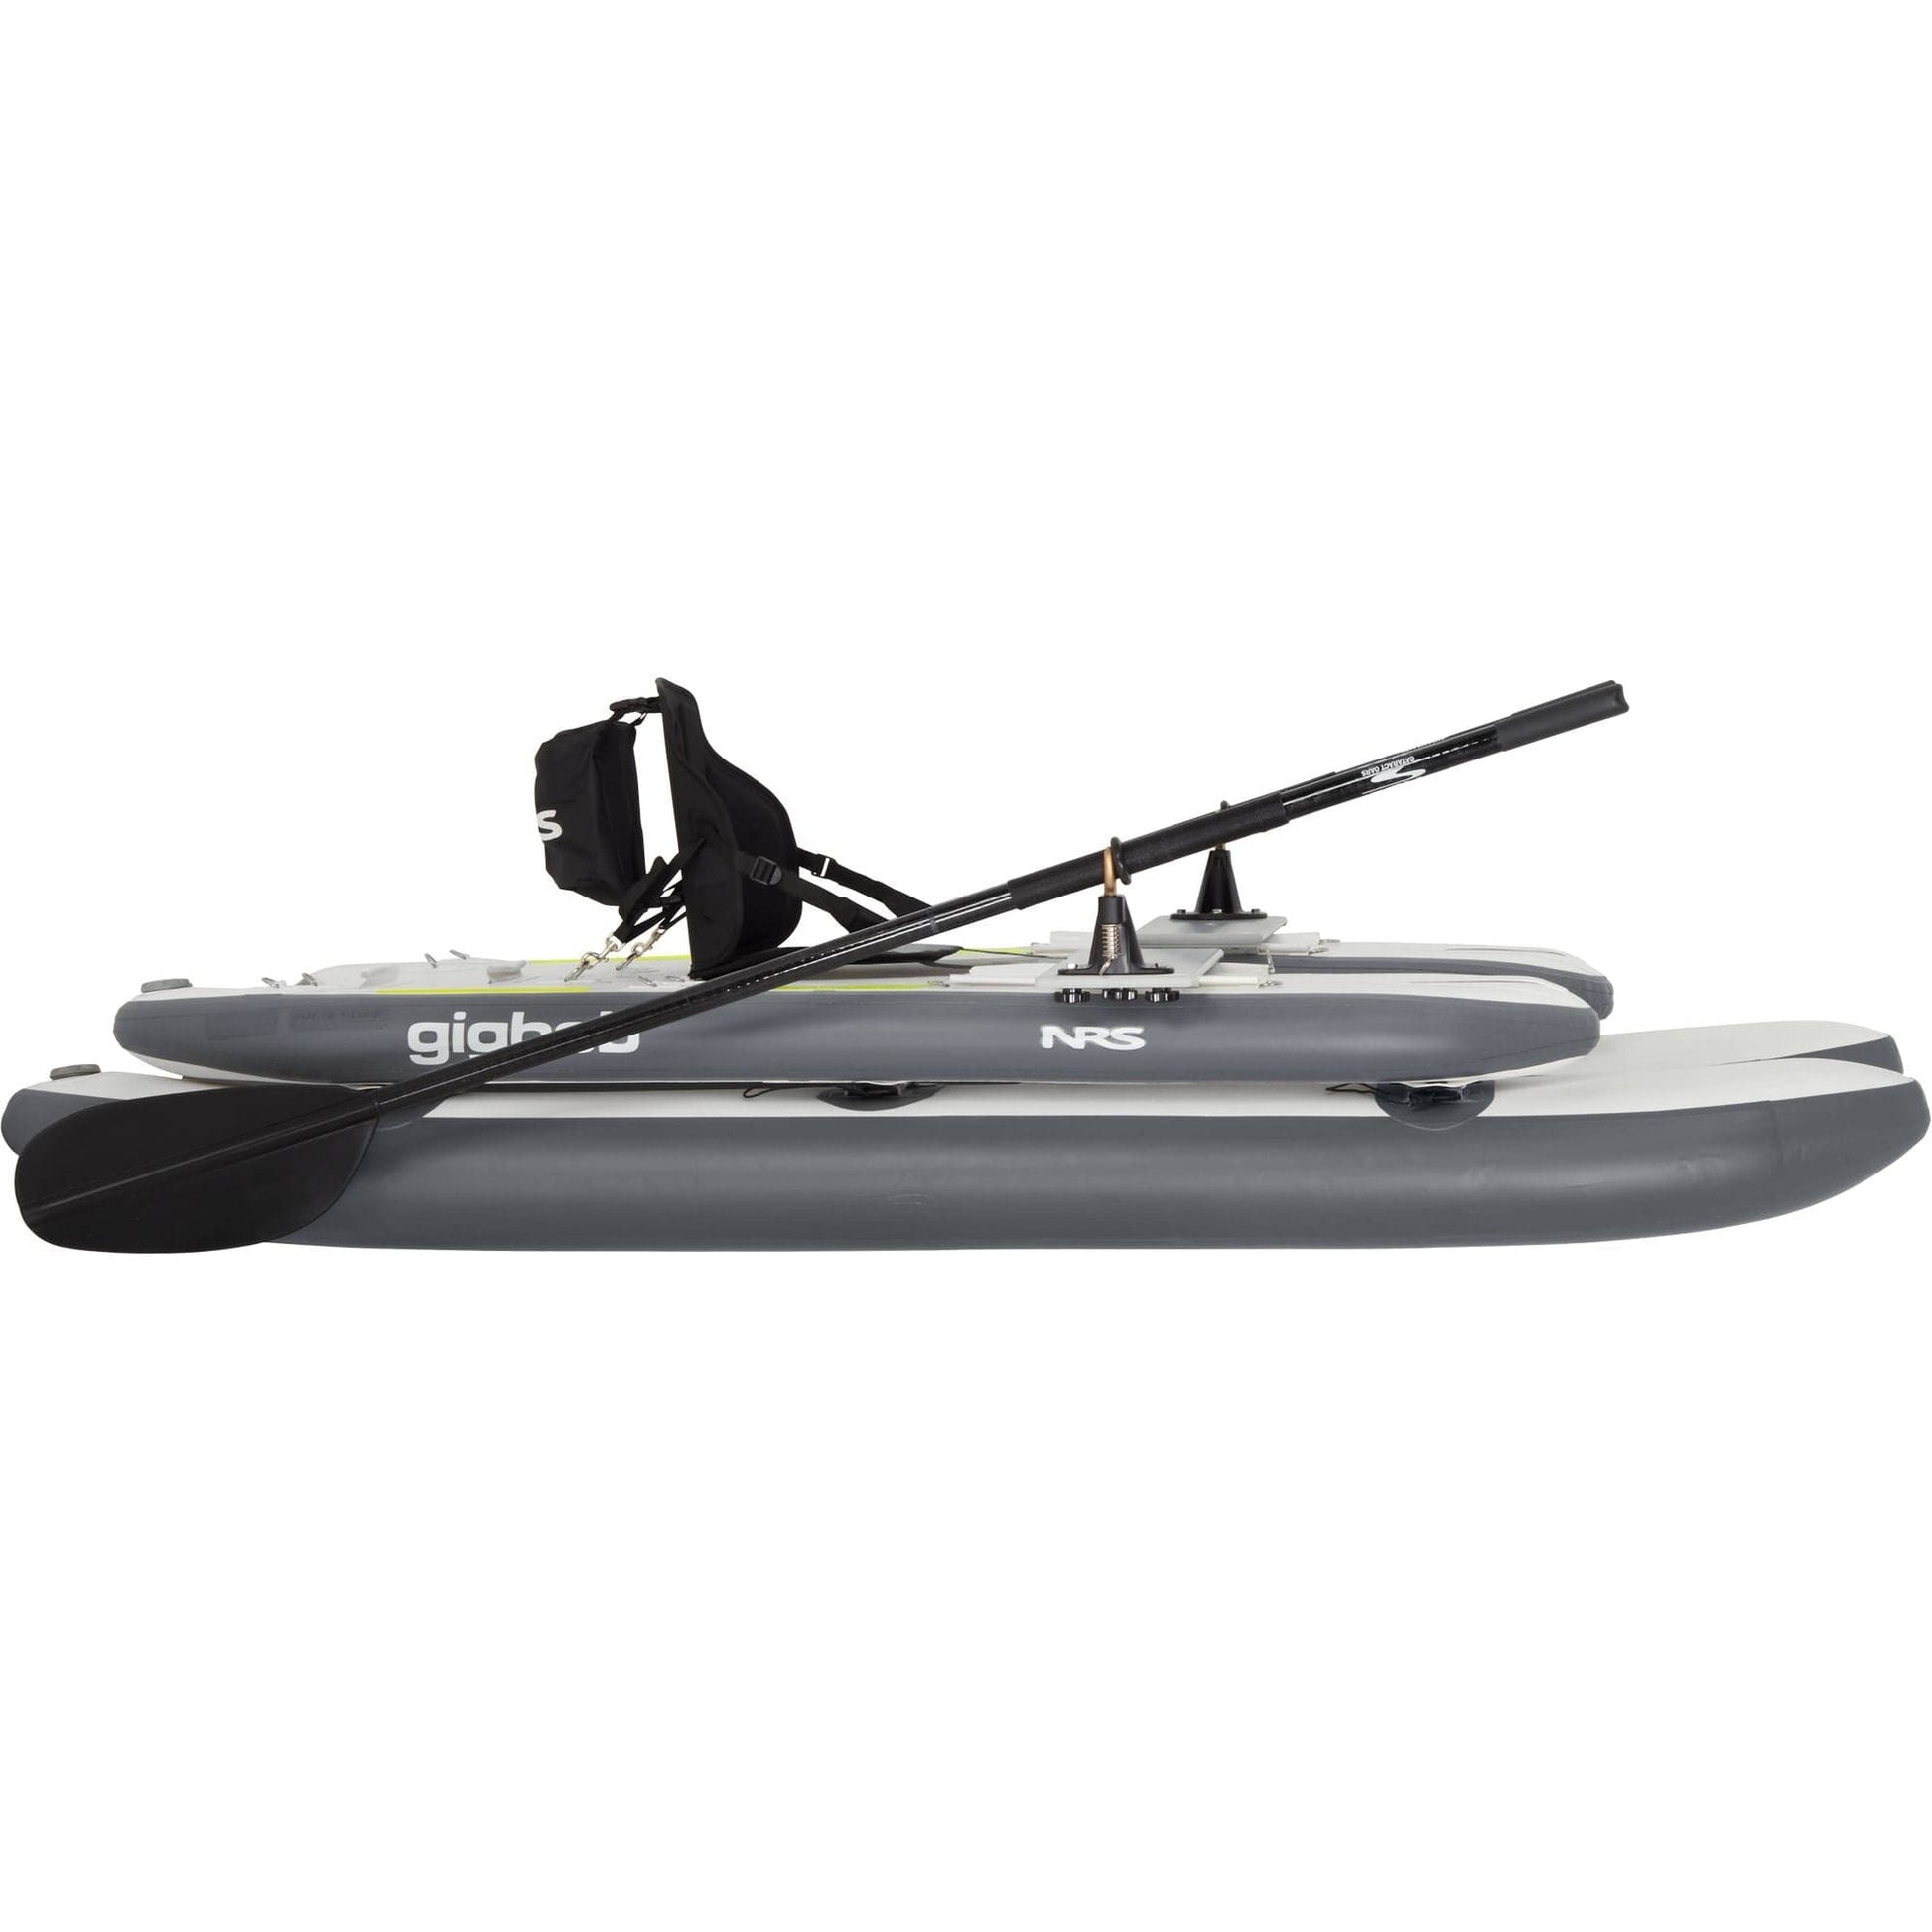 Featuring the GigBob 2.0 cataraft, fishing kayak, inflatable kayak manufactured by NRS shown here from a third angle.